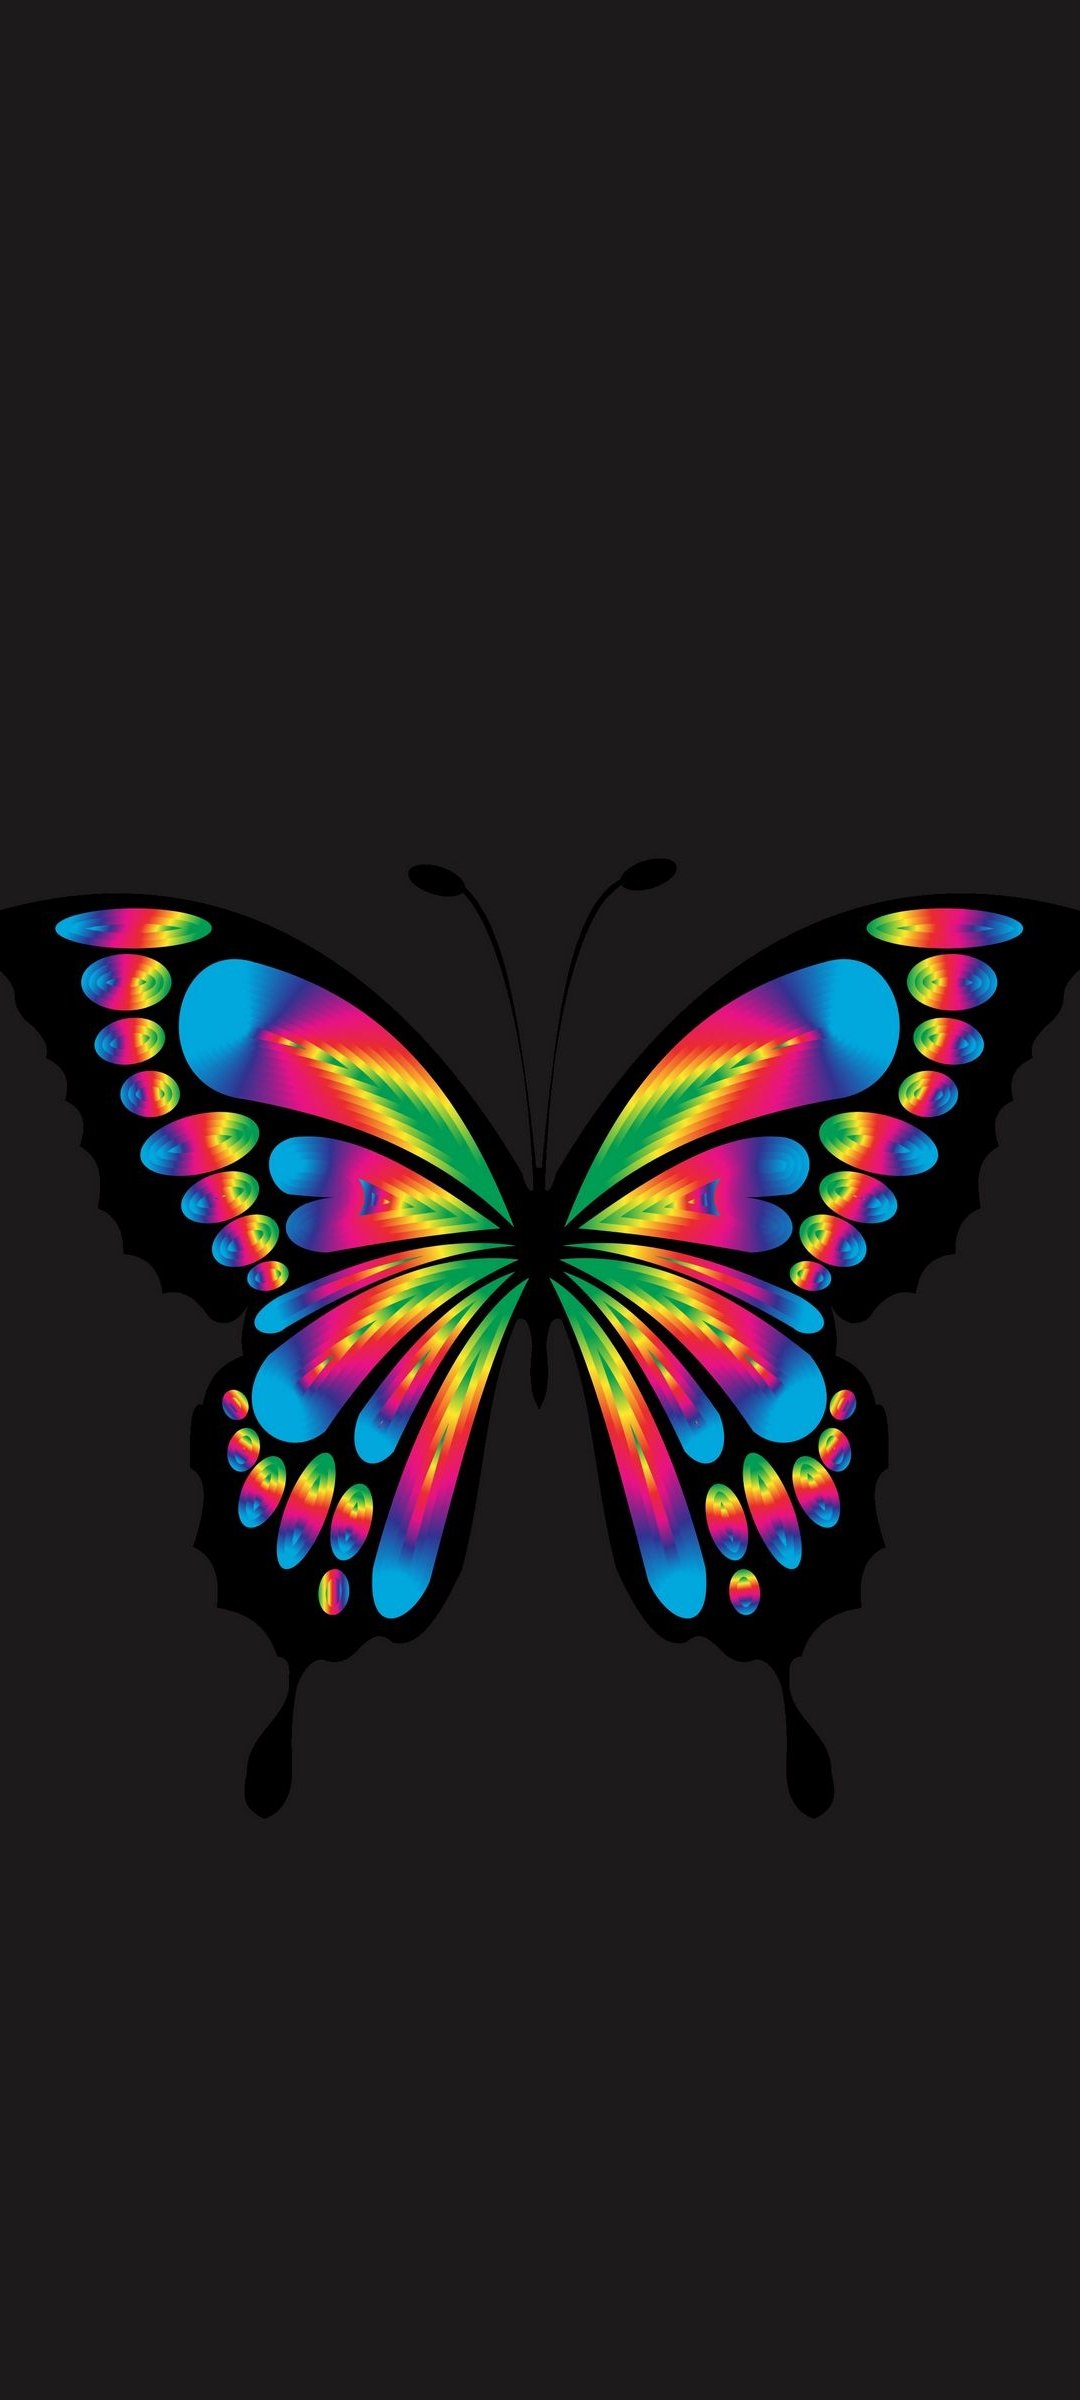 Minimalist Amoled Black Butterfly Wallpaper – S16 - Chill-out Wallpapers